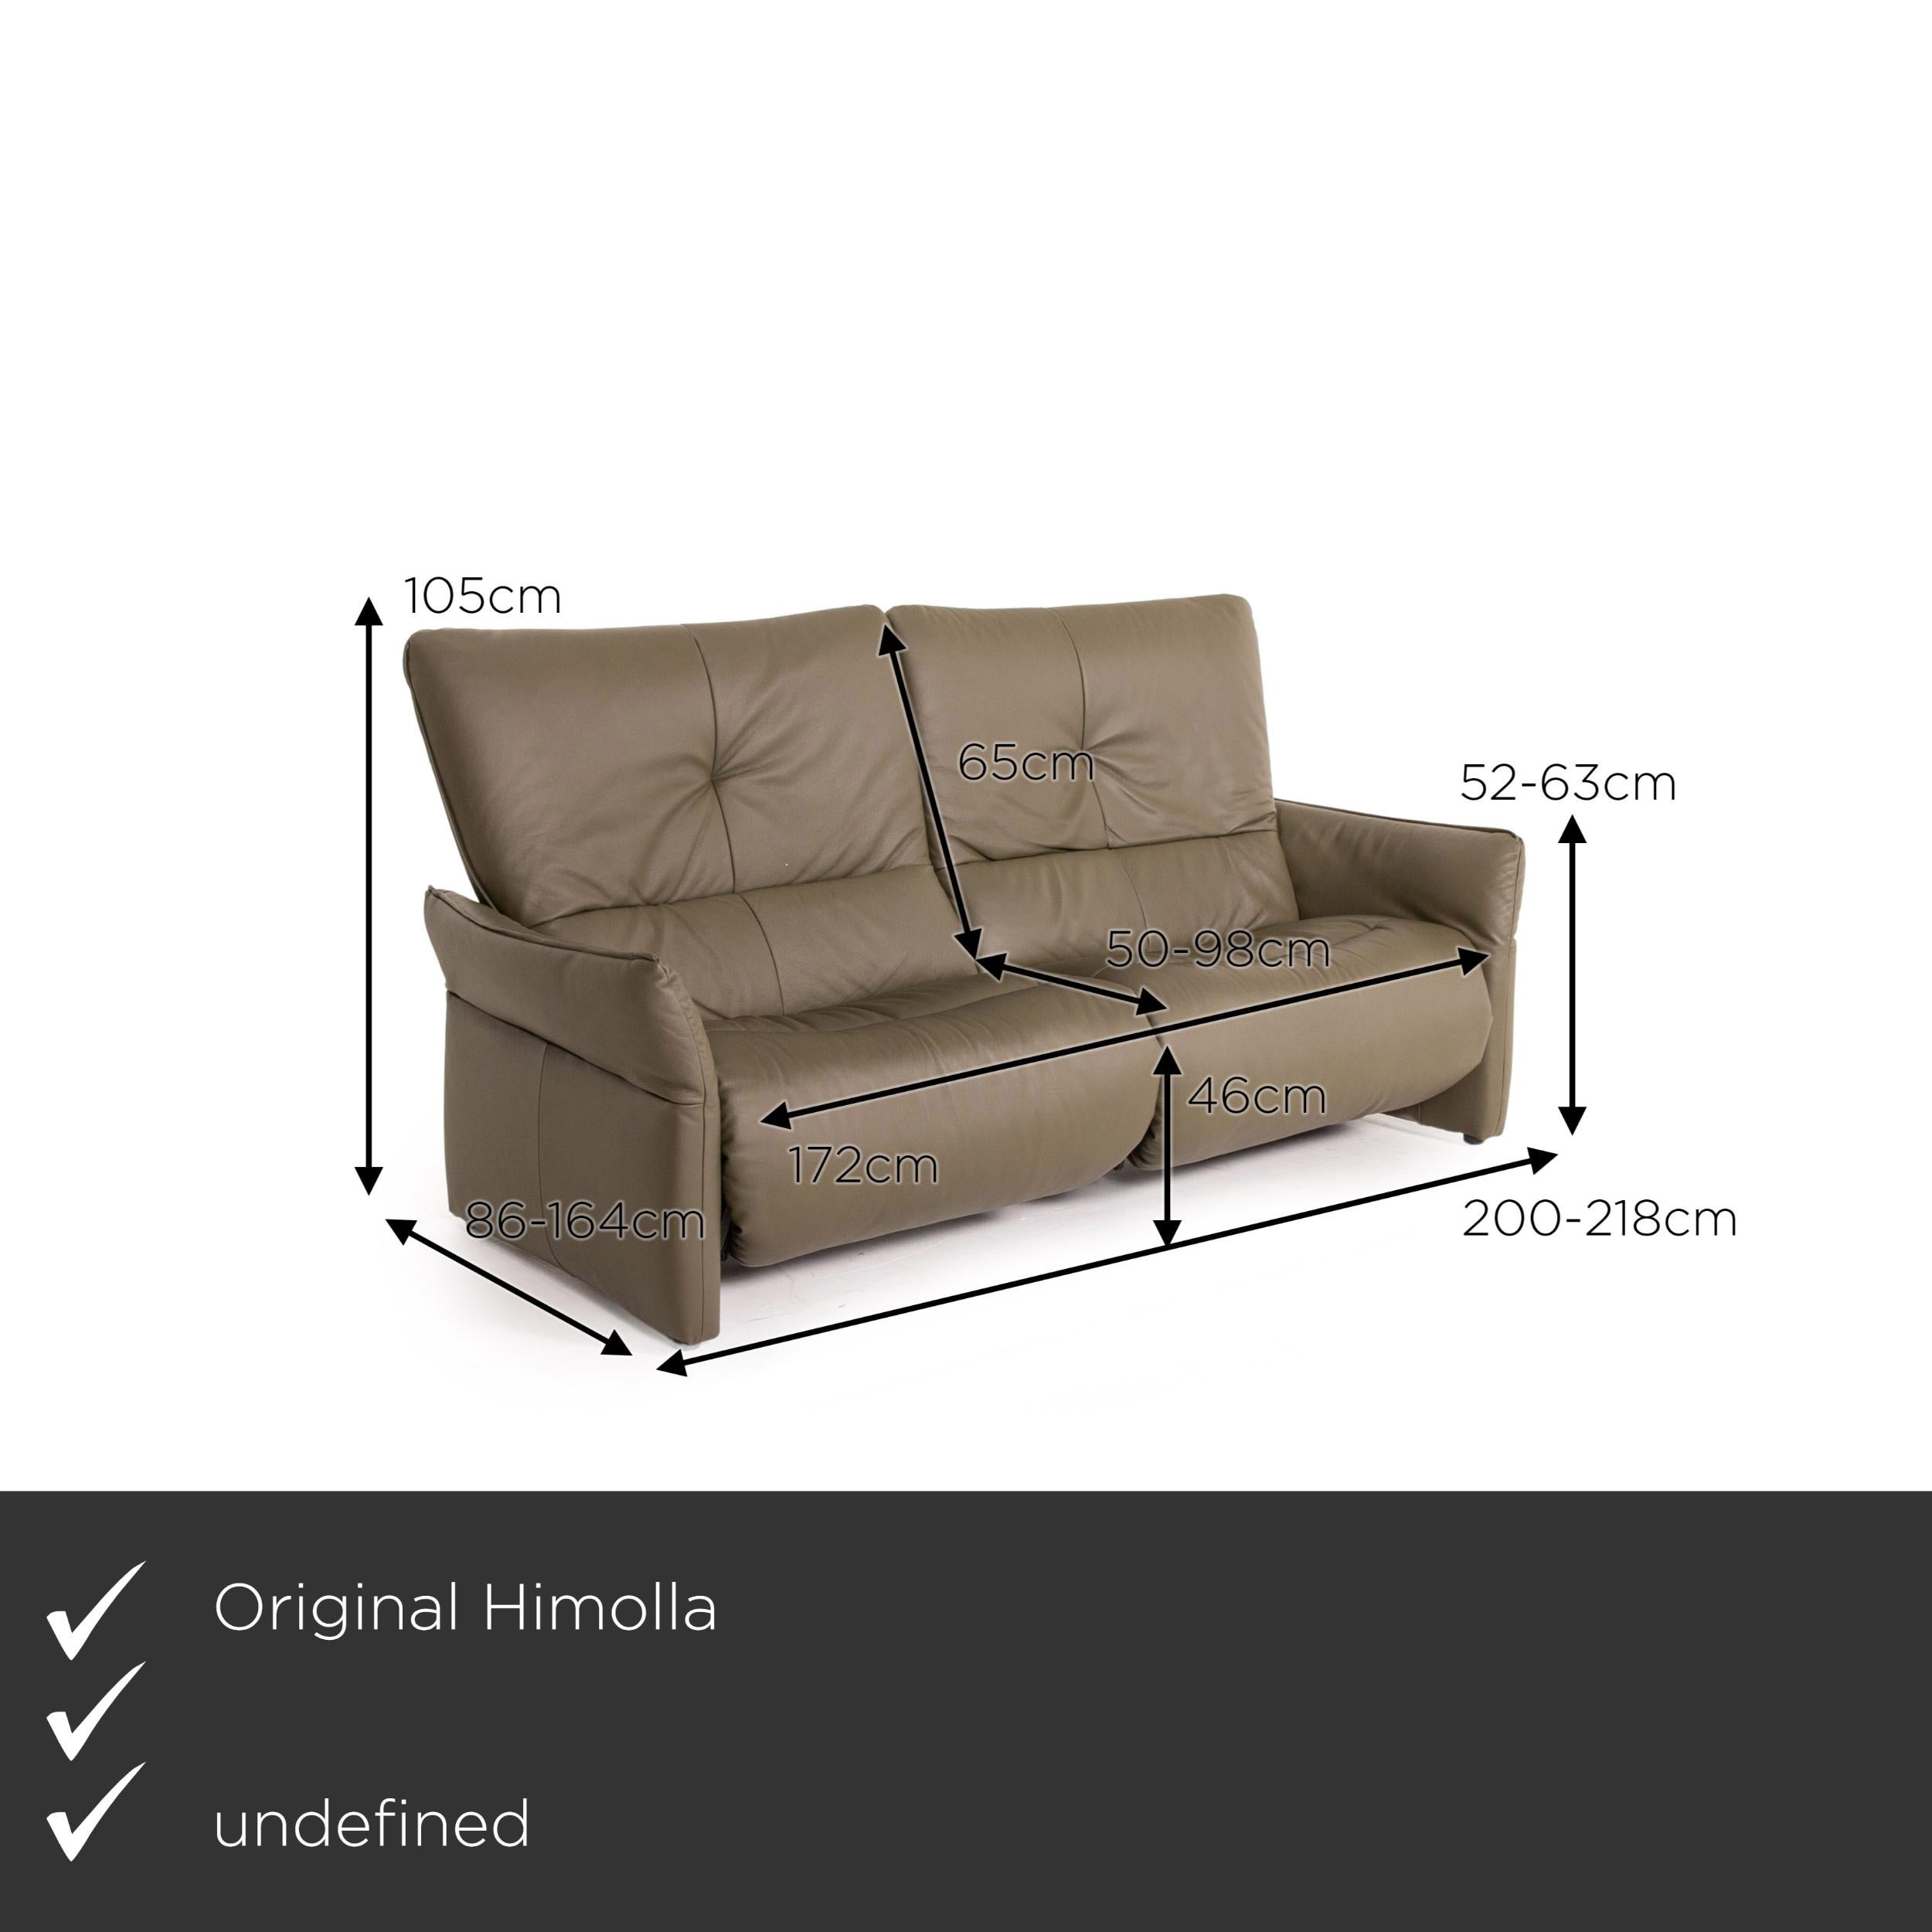 We present to you a Himolla Cumuly leather sofa set olive green 1x three-seater 1x two-seater.
 

 Product measurements in centimeters:
 

Depth: 86
Width: 200
Height: 105
Seat height: 45
Rest height: 52
Seat depth: 50
Seat width: